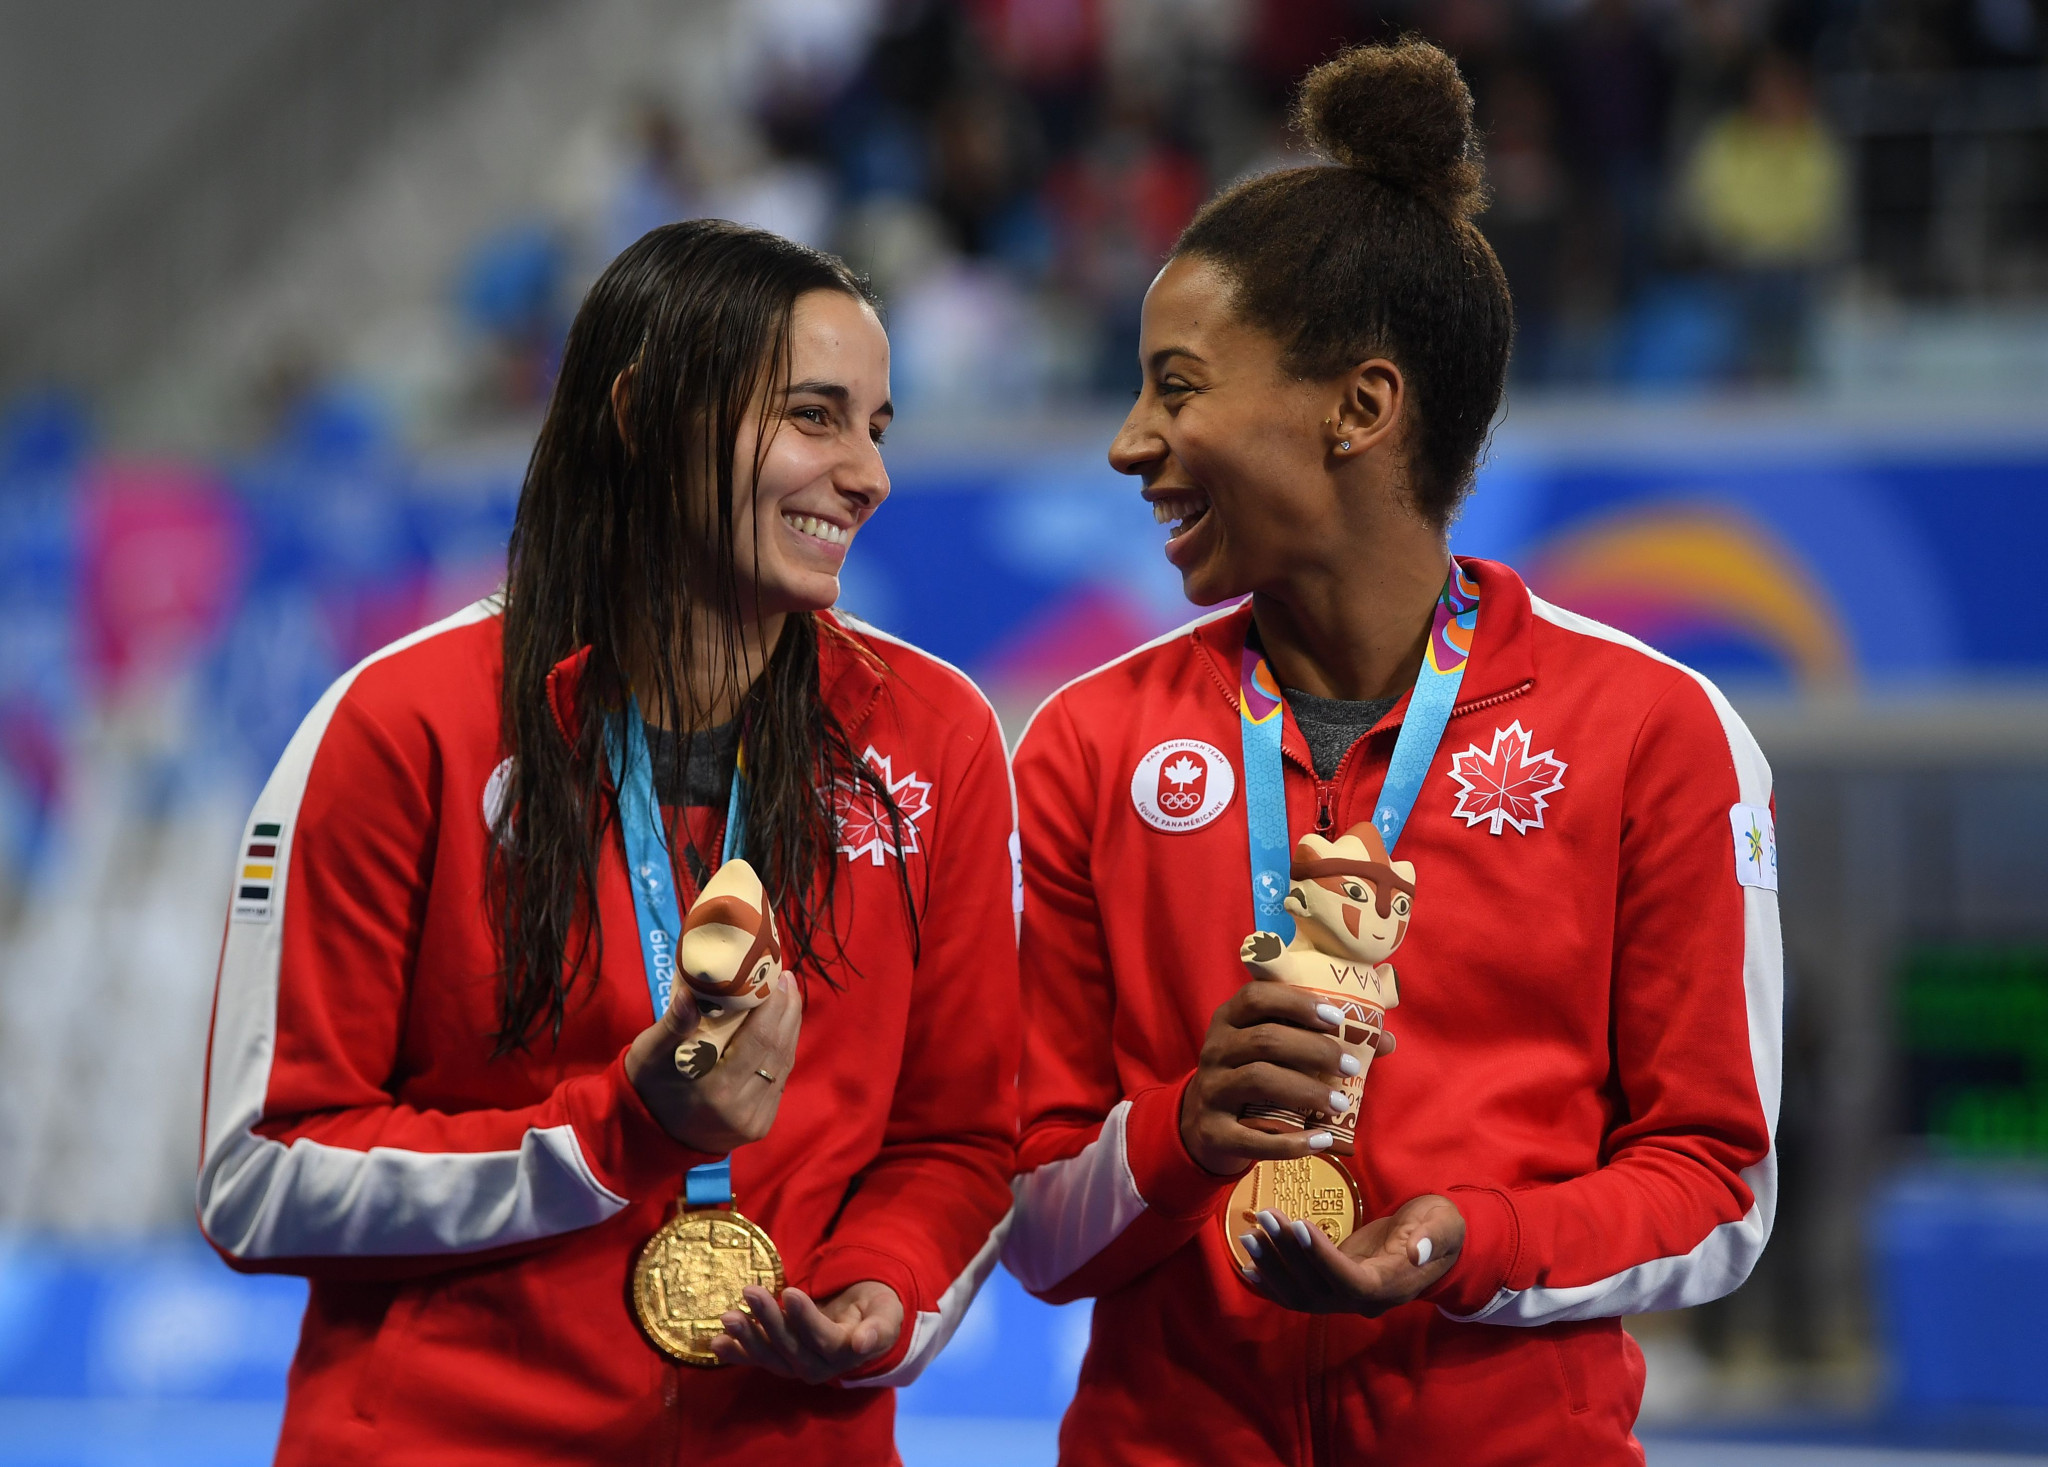 Canada's Pamela Ware and Jennifer Abel earned the gold ©Getty Images